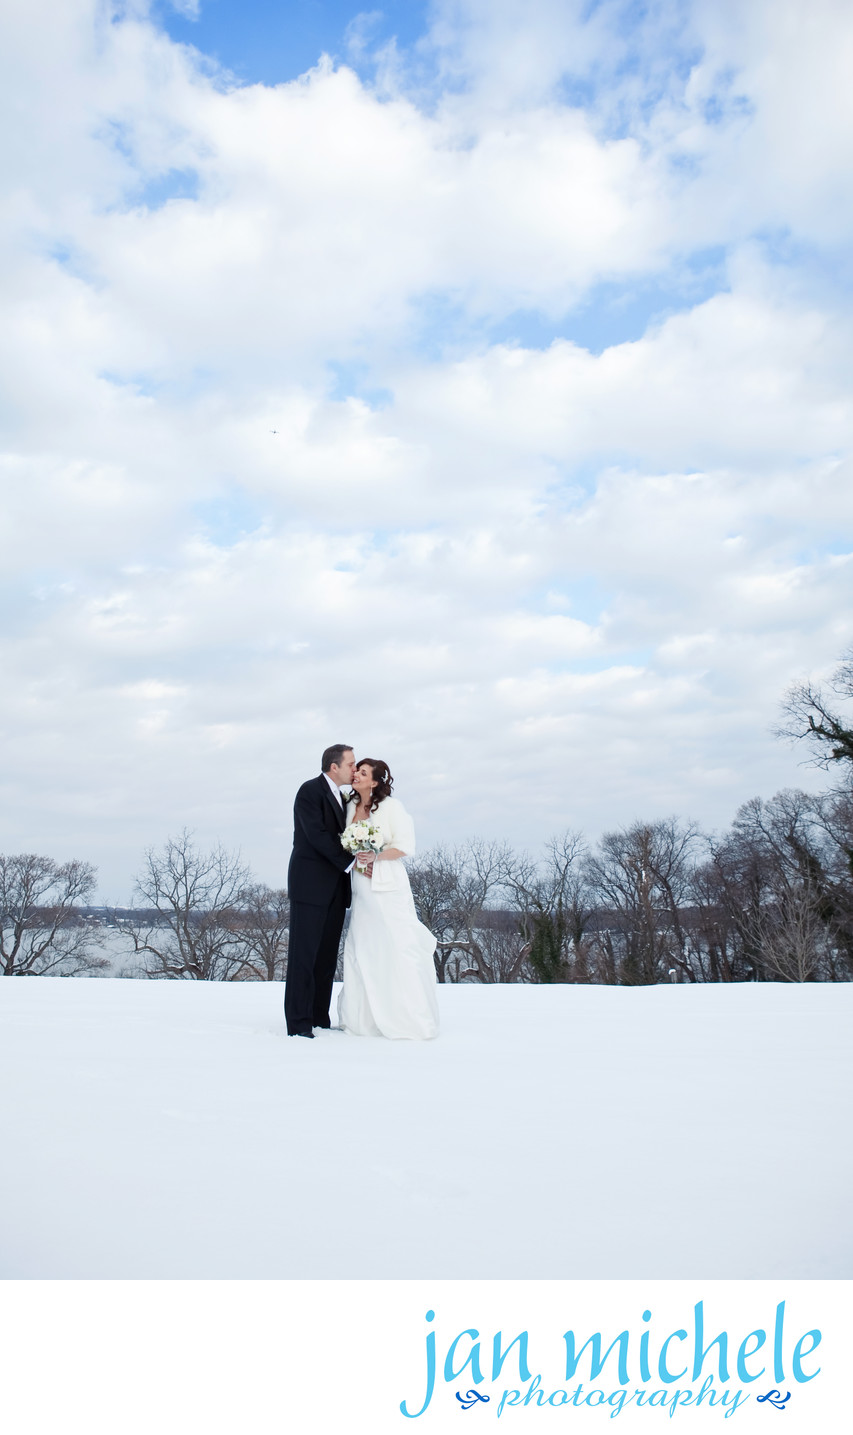 Blue sky and Snow on a wedding day! 